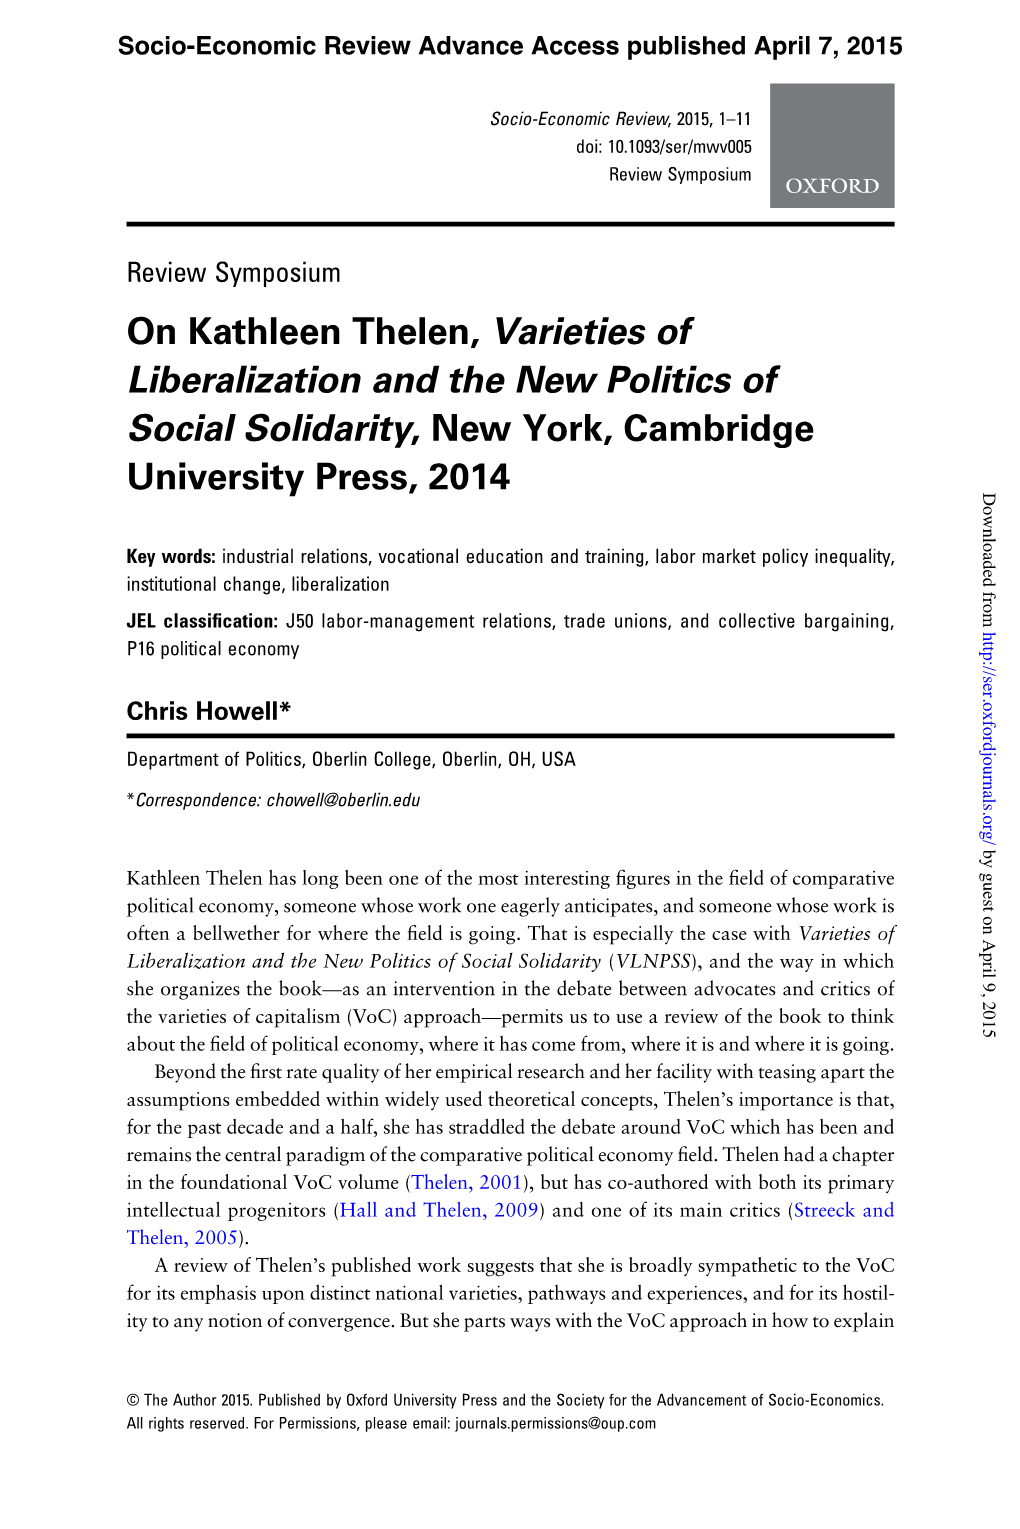 On Kathleen Thelen, Varieties of Liberalization and the New Politics of Social Solidarity, New York, Cambridge